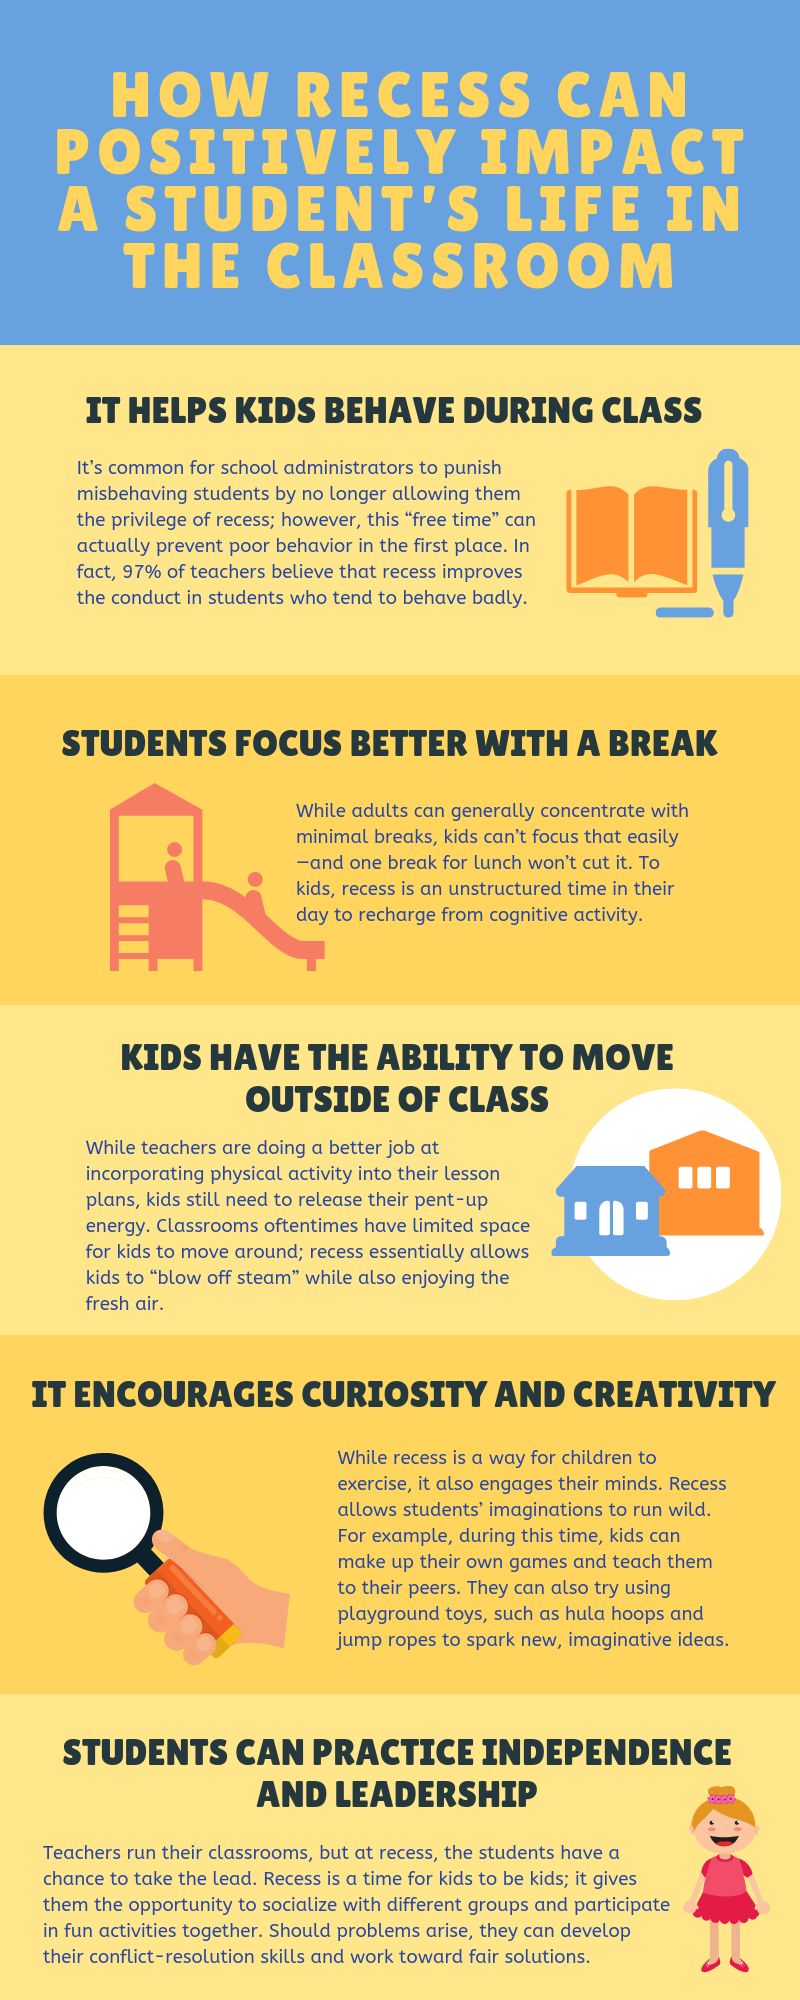 Positive Recess Impacts On Student Life Image